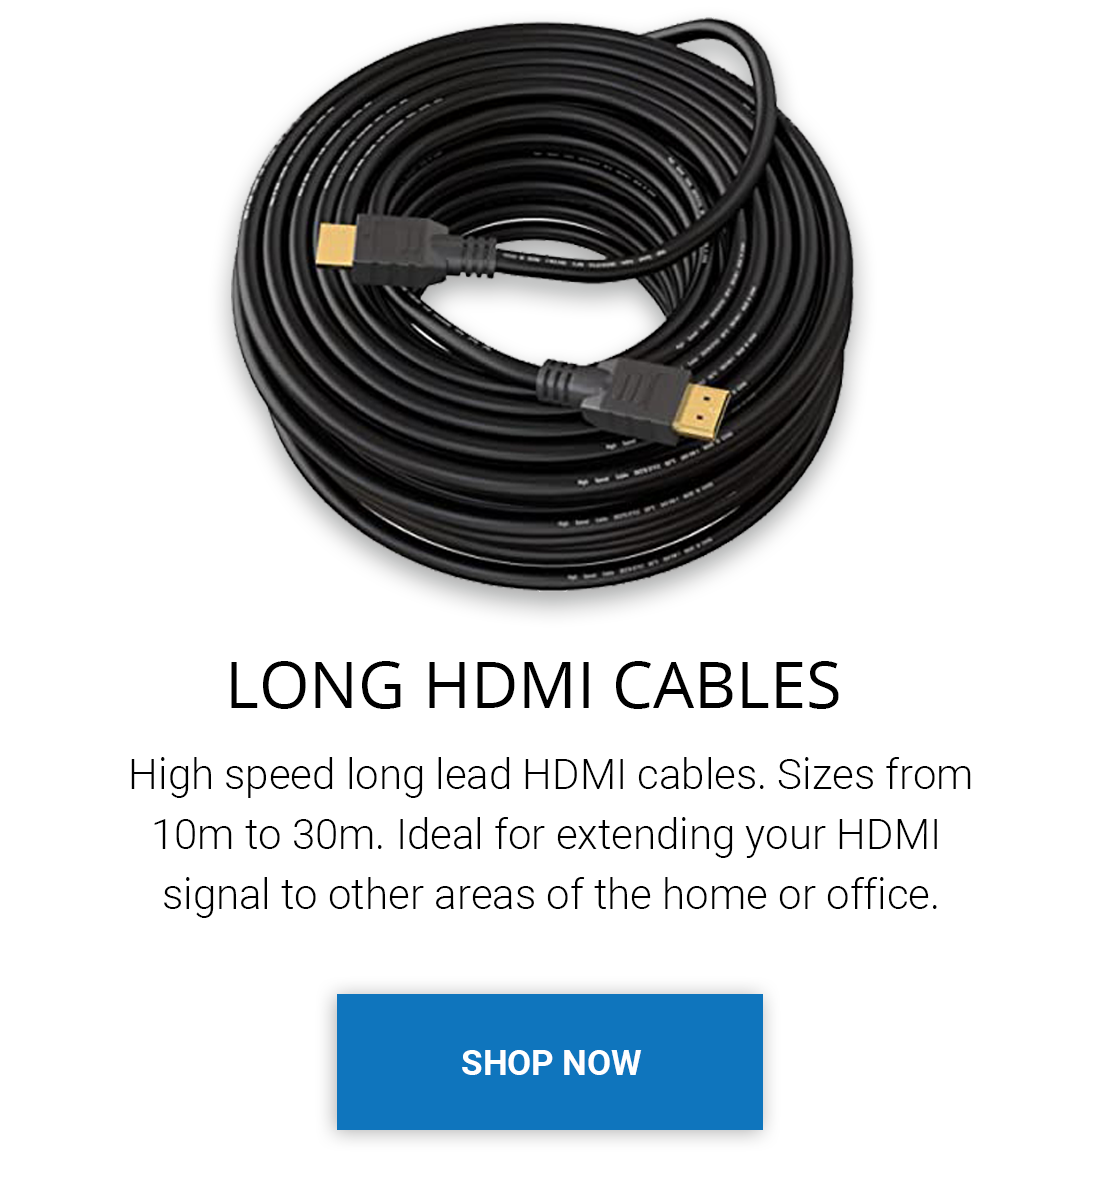 True HQ - HDMI Cable Specialists - Buy High Quality HDMI Cables